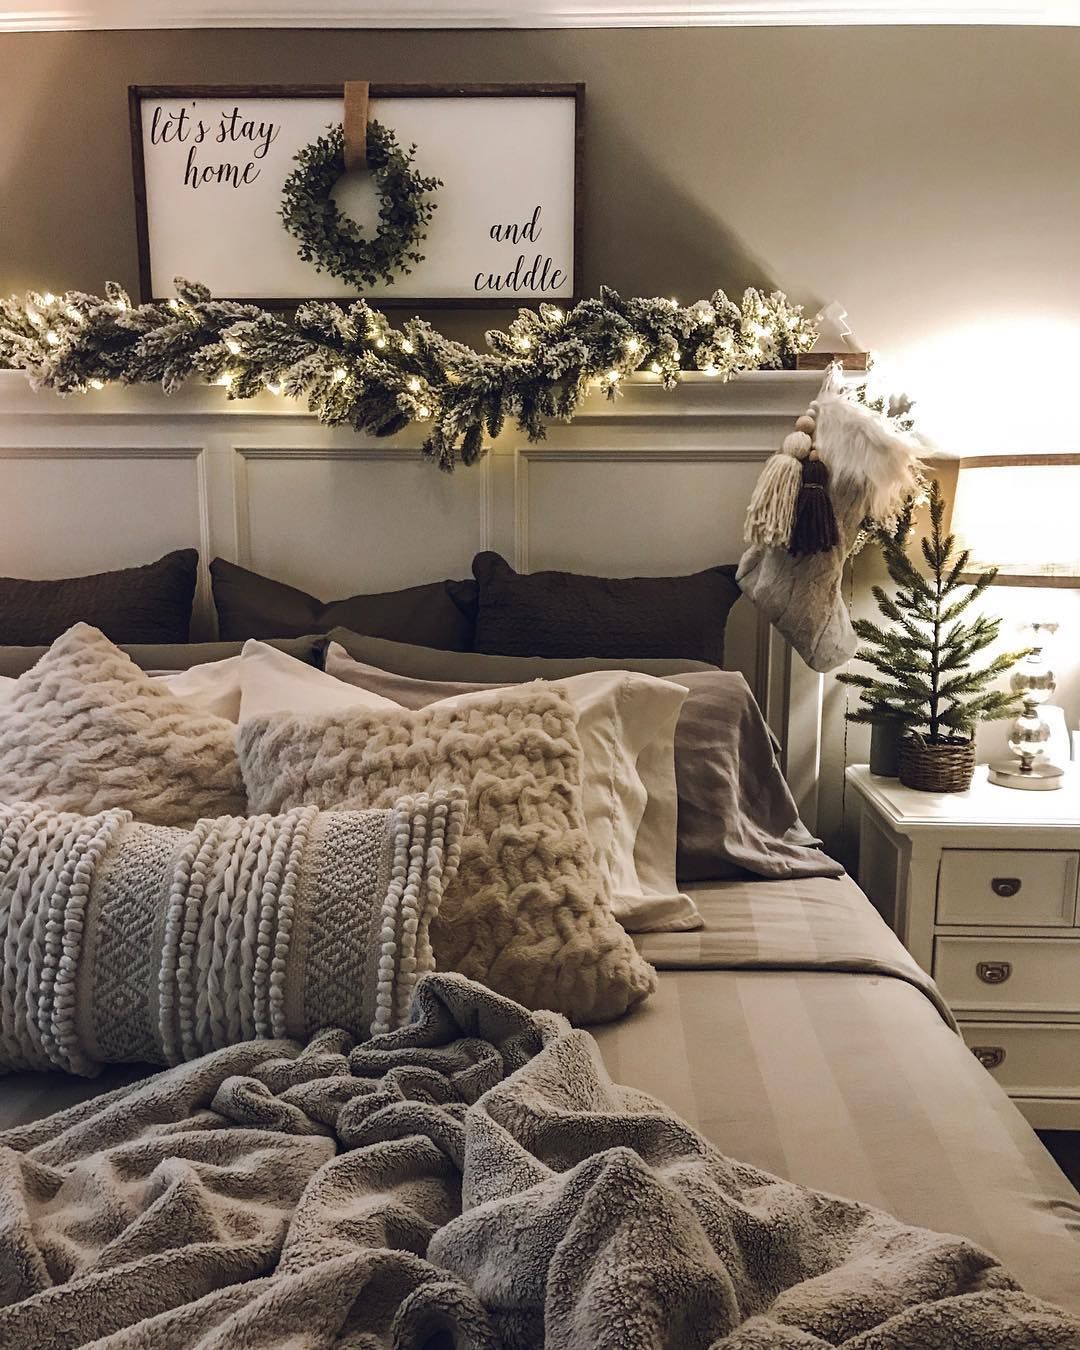 Top 37 Christmas Bedroom Decorations Ideas 2020 - Page 5 of 37 - newyearlights. com -   16 christmas decor for bedroom ideas